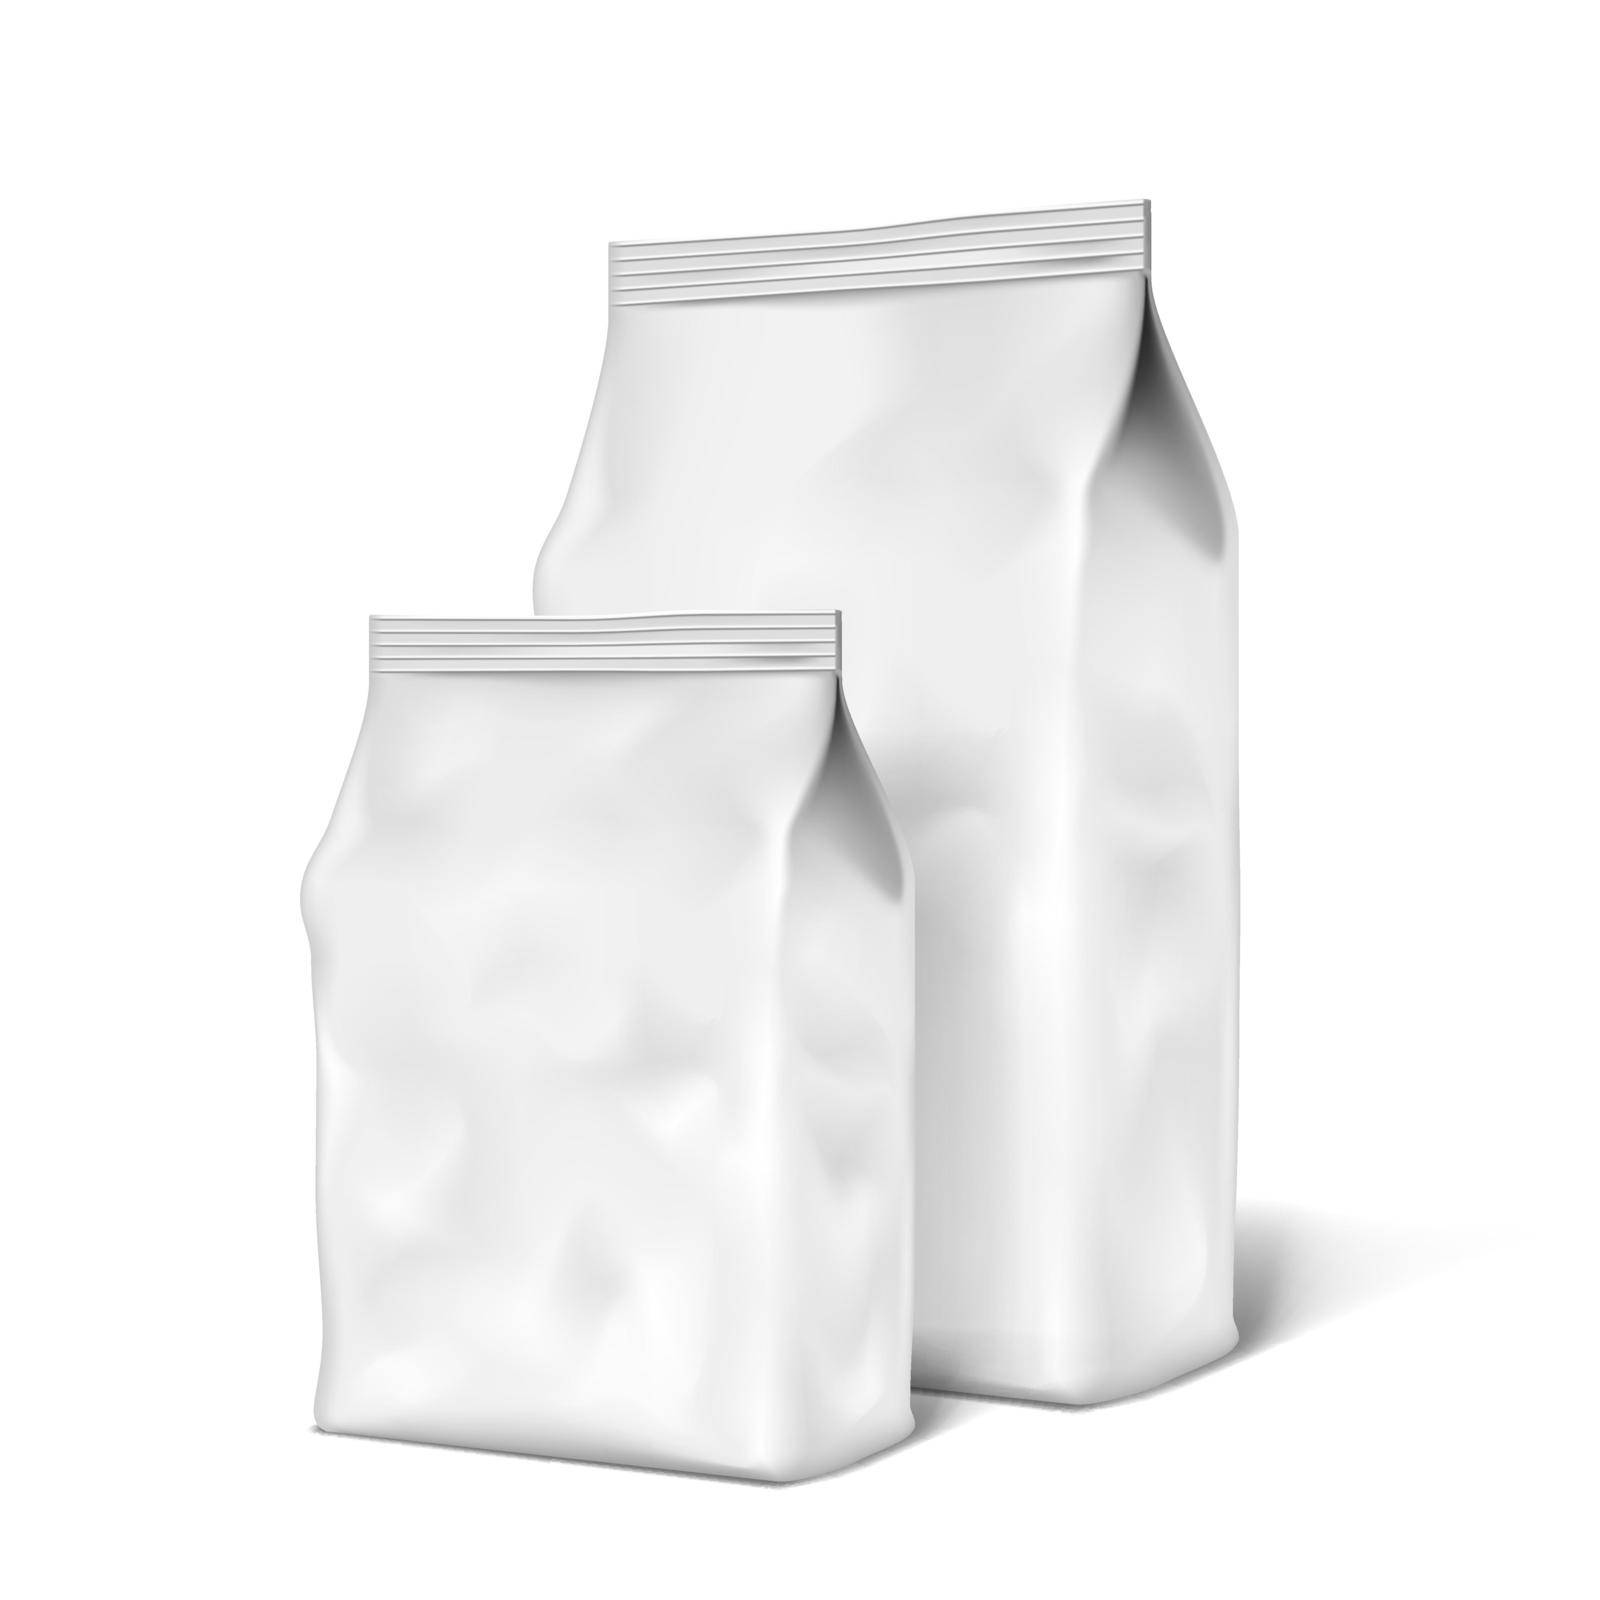 Realistic Foil Or Paper Food Stand Up Pouch Snack Sachet Bag Packaging. EPS10 Vector